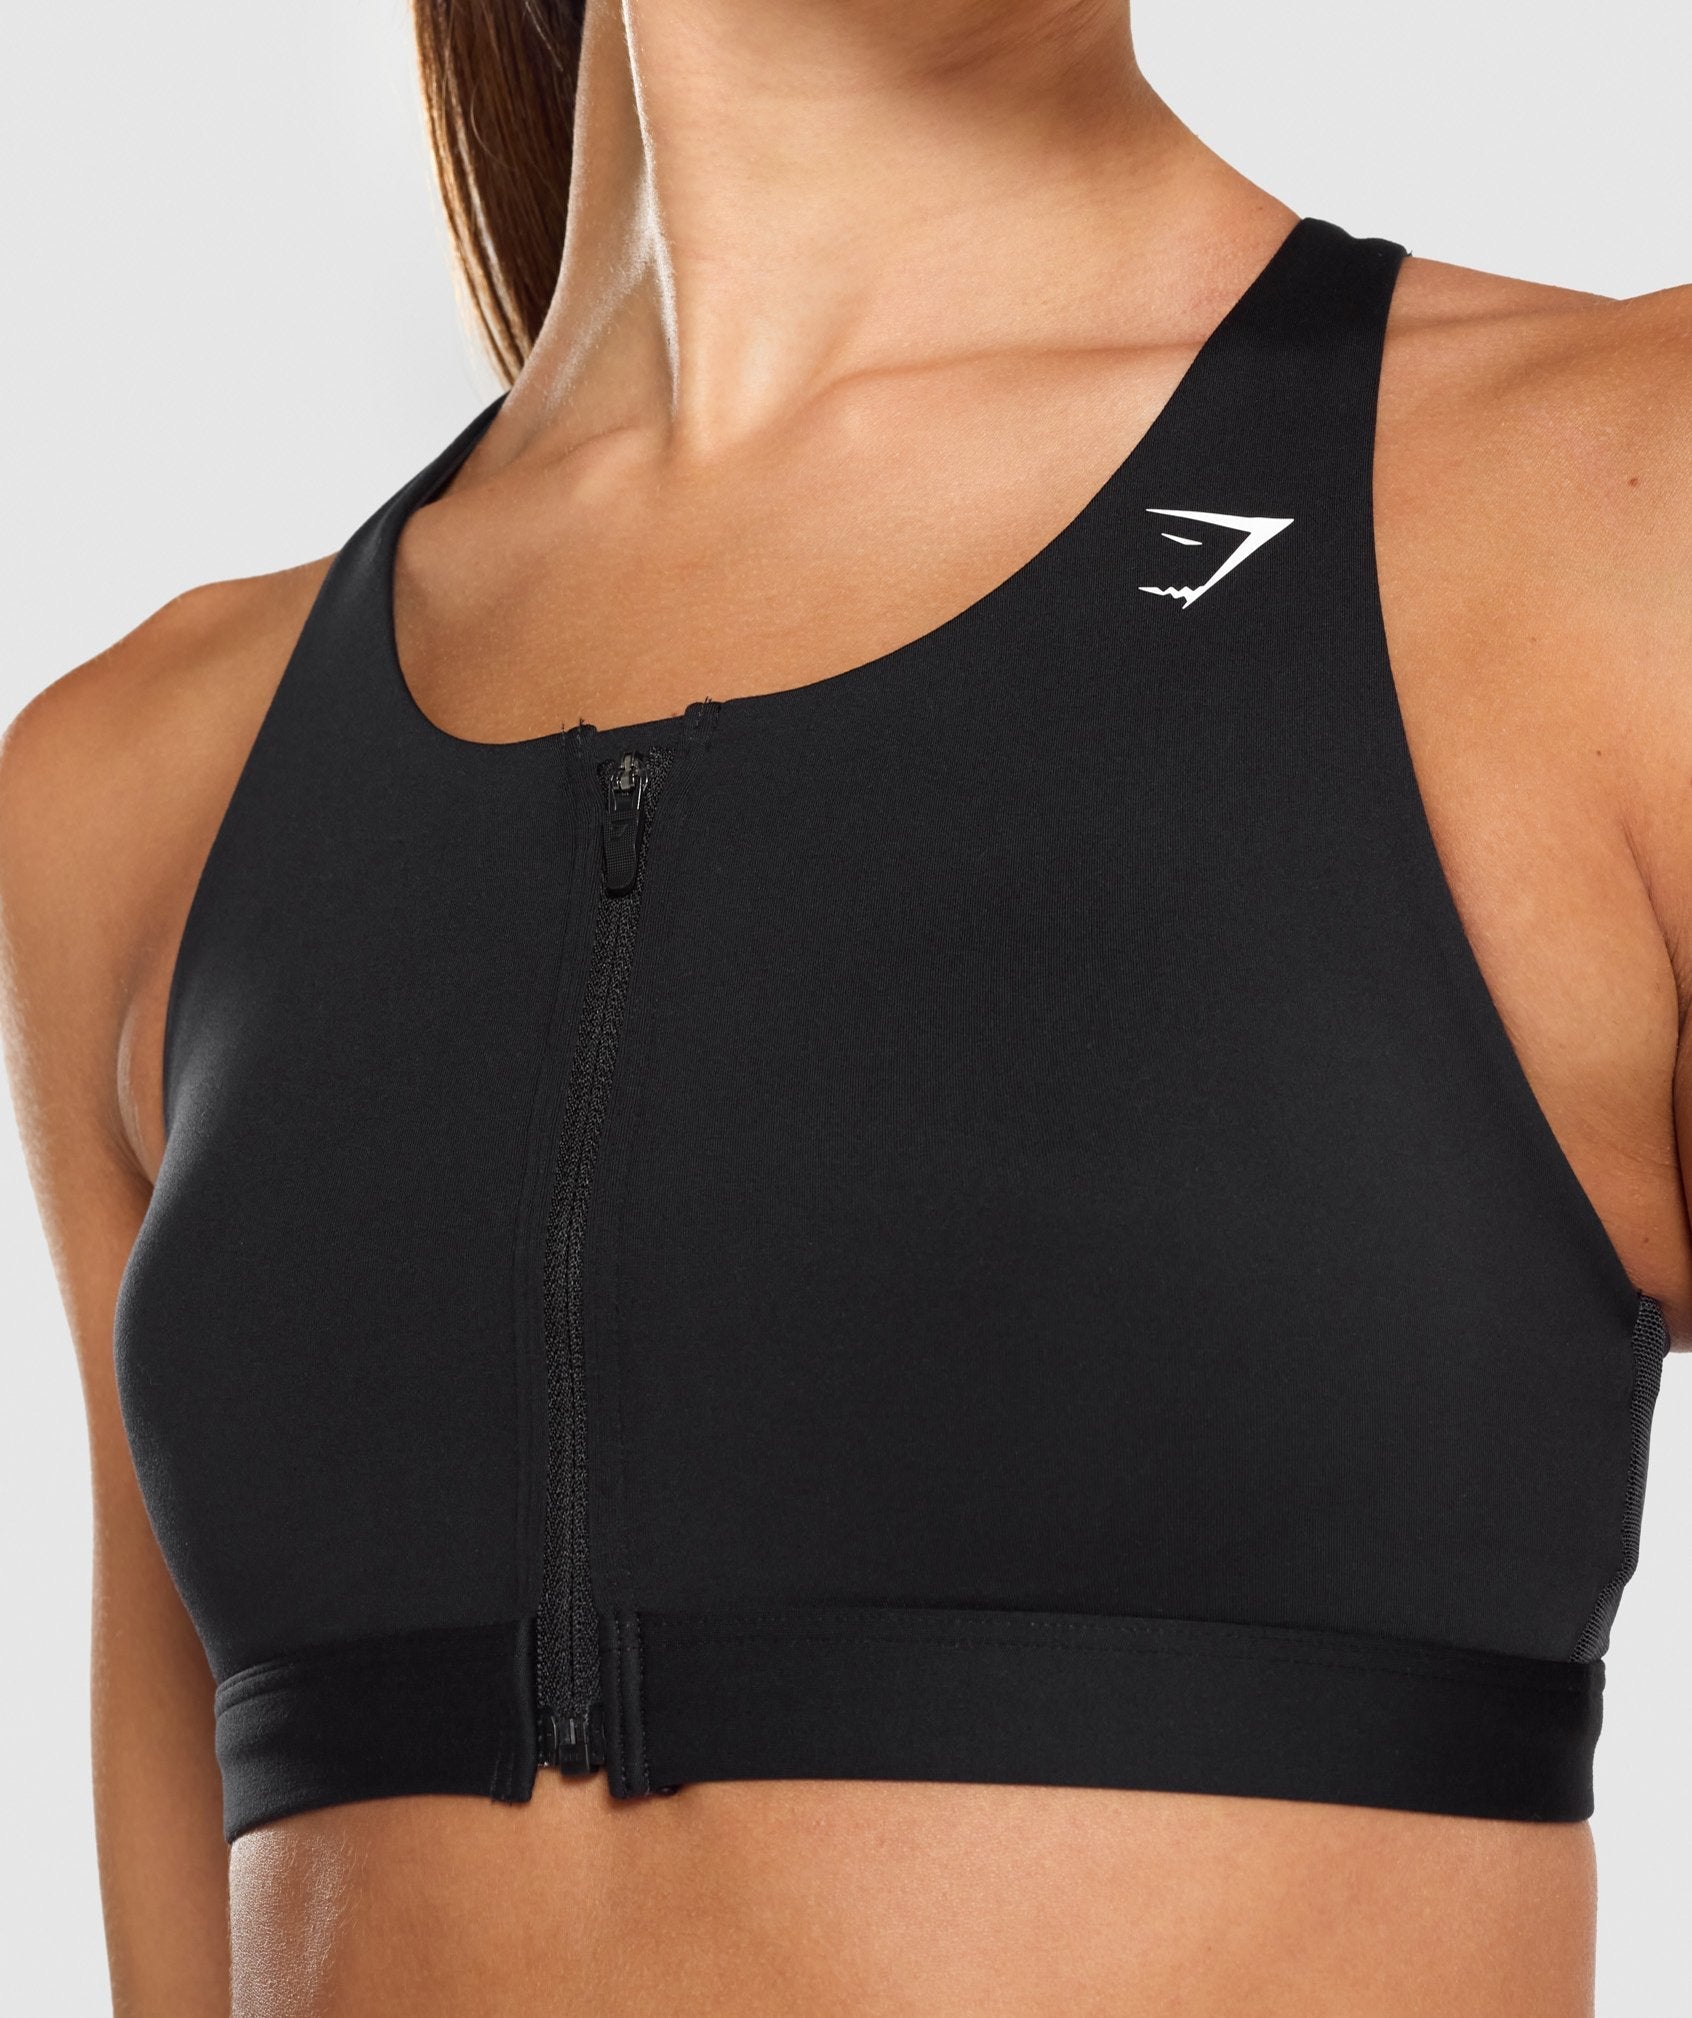 MUGUOY Adjustable Super Supportive Sport Bra, Zip Front High Impact Sports  Lifting Bra, Workout Fitness Push Up Seamless Tank Tops (S, Black) :  : Fashion